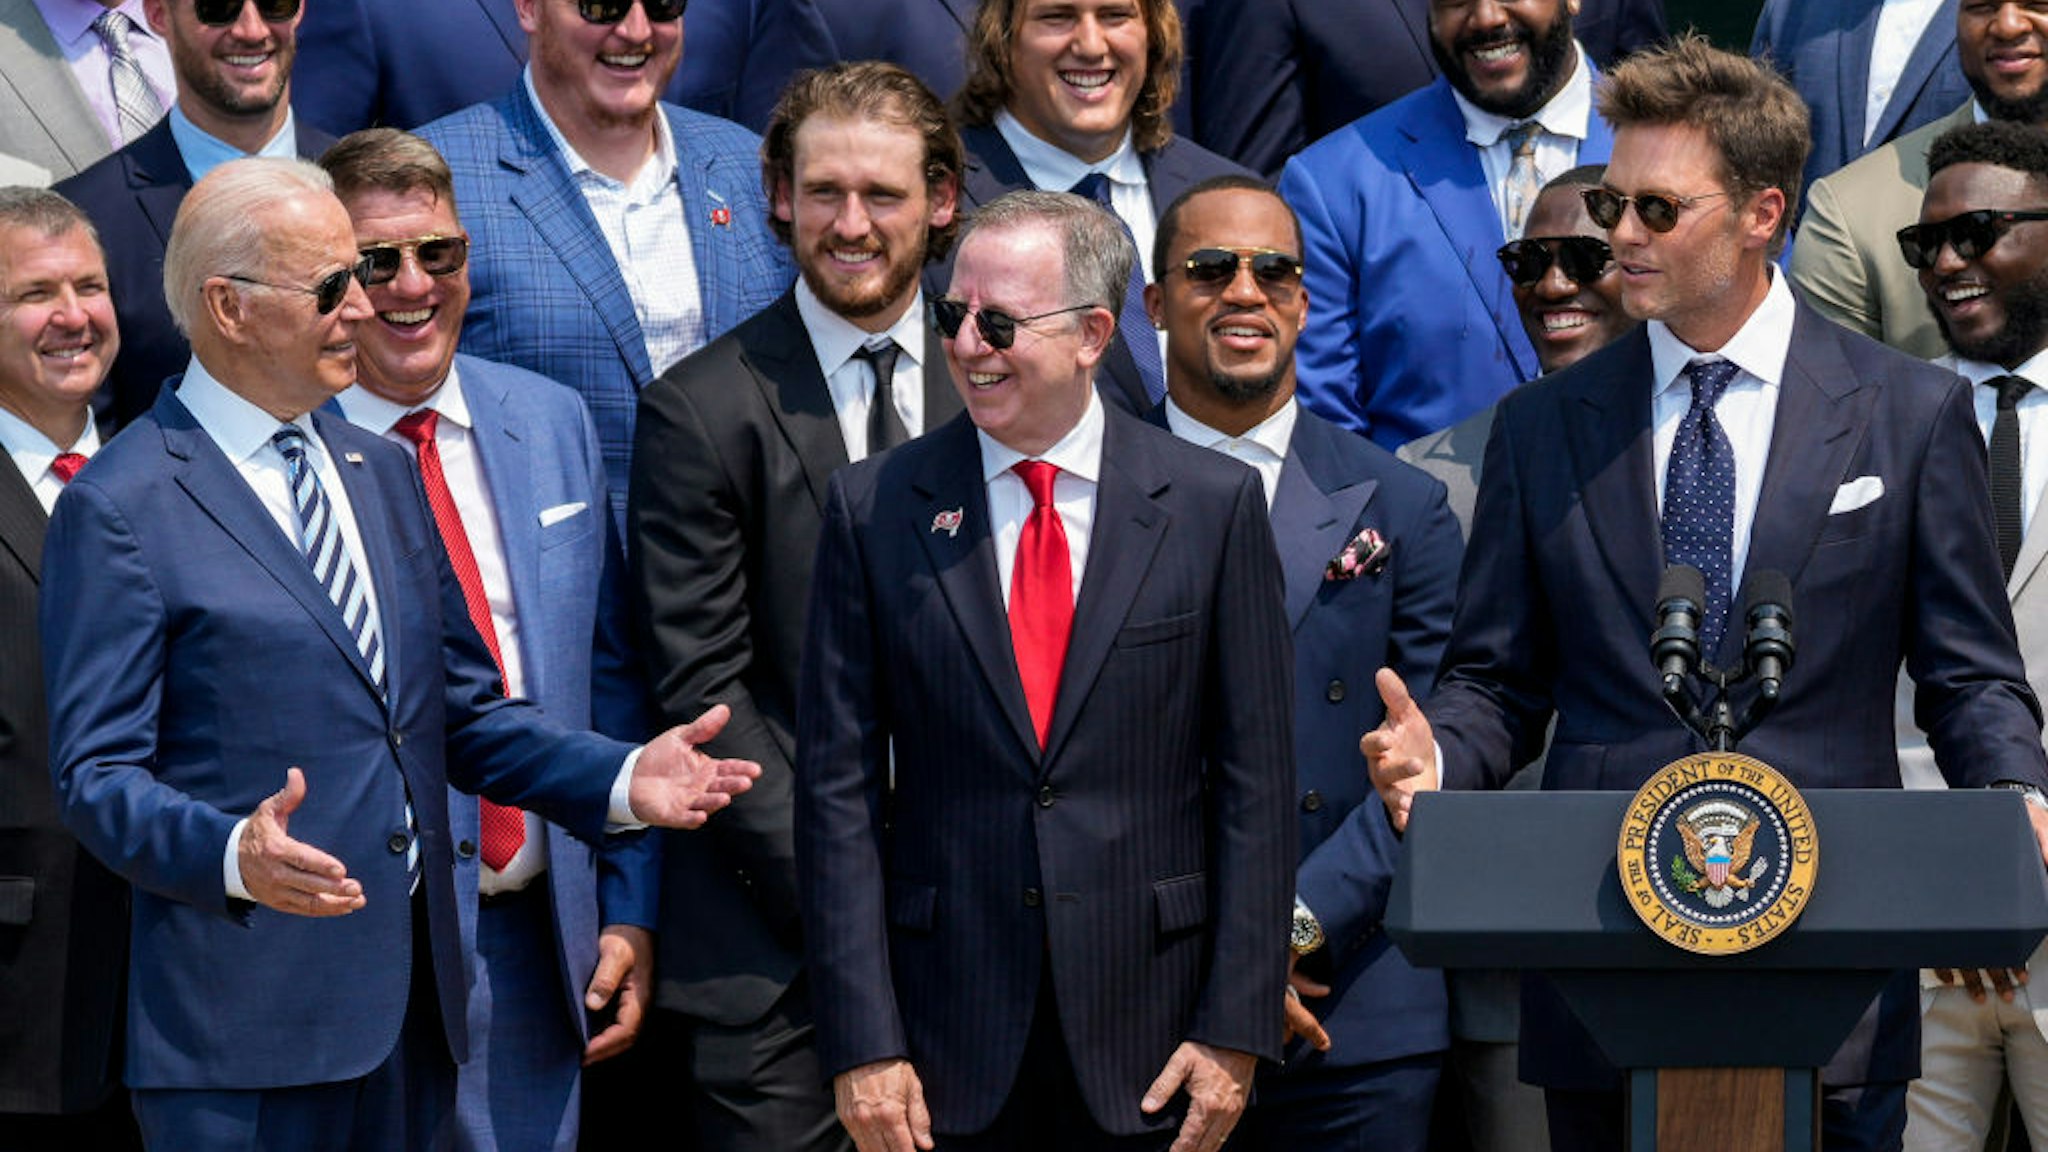 U.S. President Joe Biden laughs as quarterback Tom Brady jokes while speaking as the 2021 NFL Super Bowl champion Tampa Bay Buccaneers are welcomed to the South Lawn of the White House on July 20, 2021 in Washington, DC.